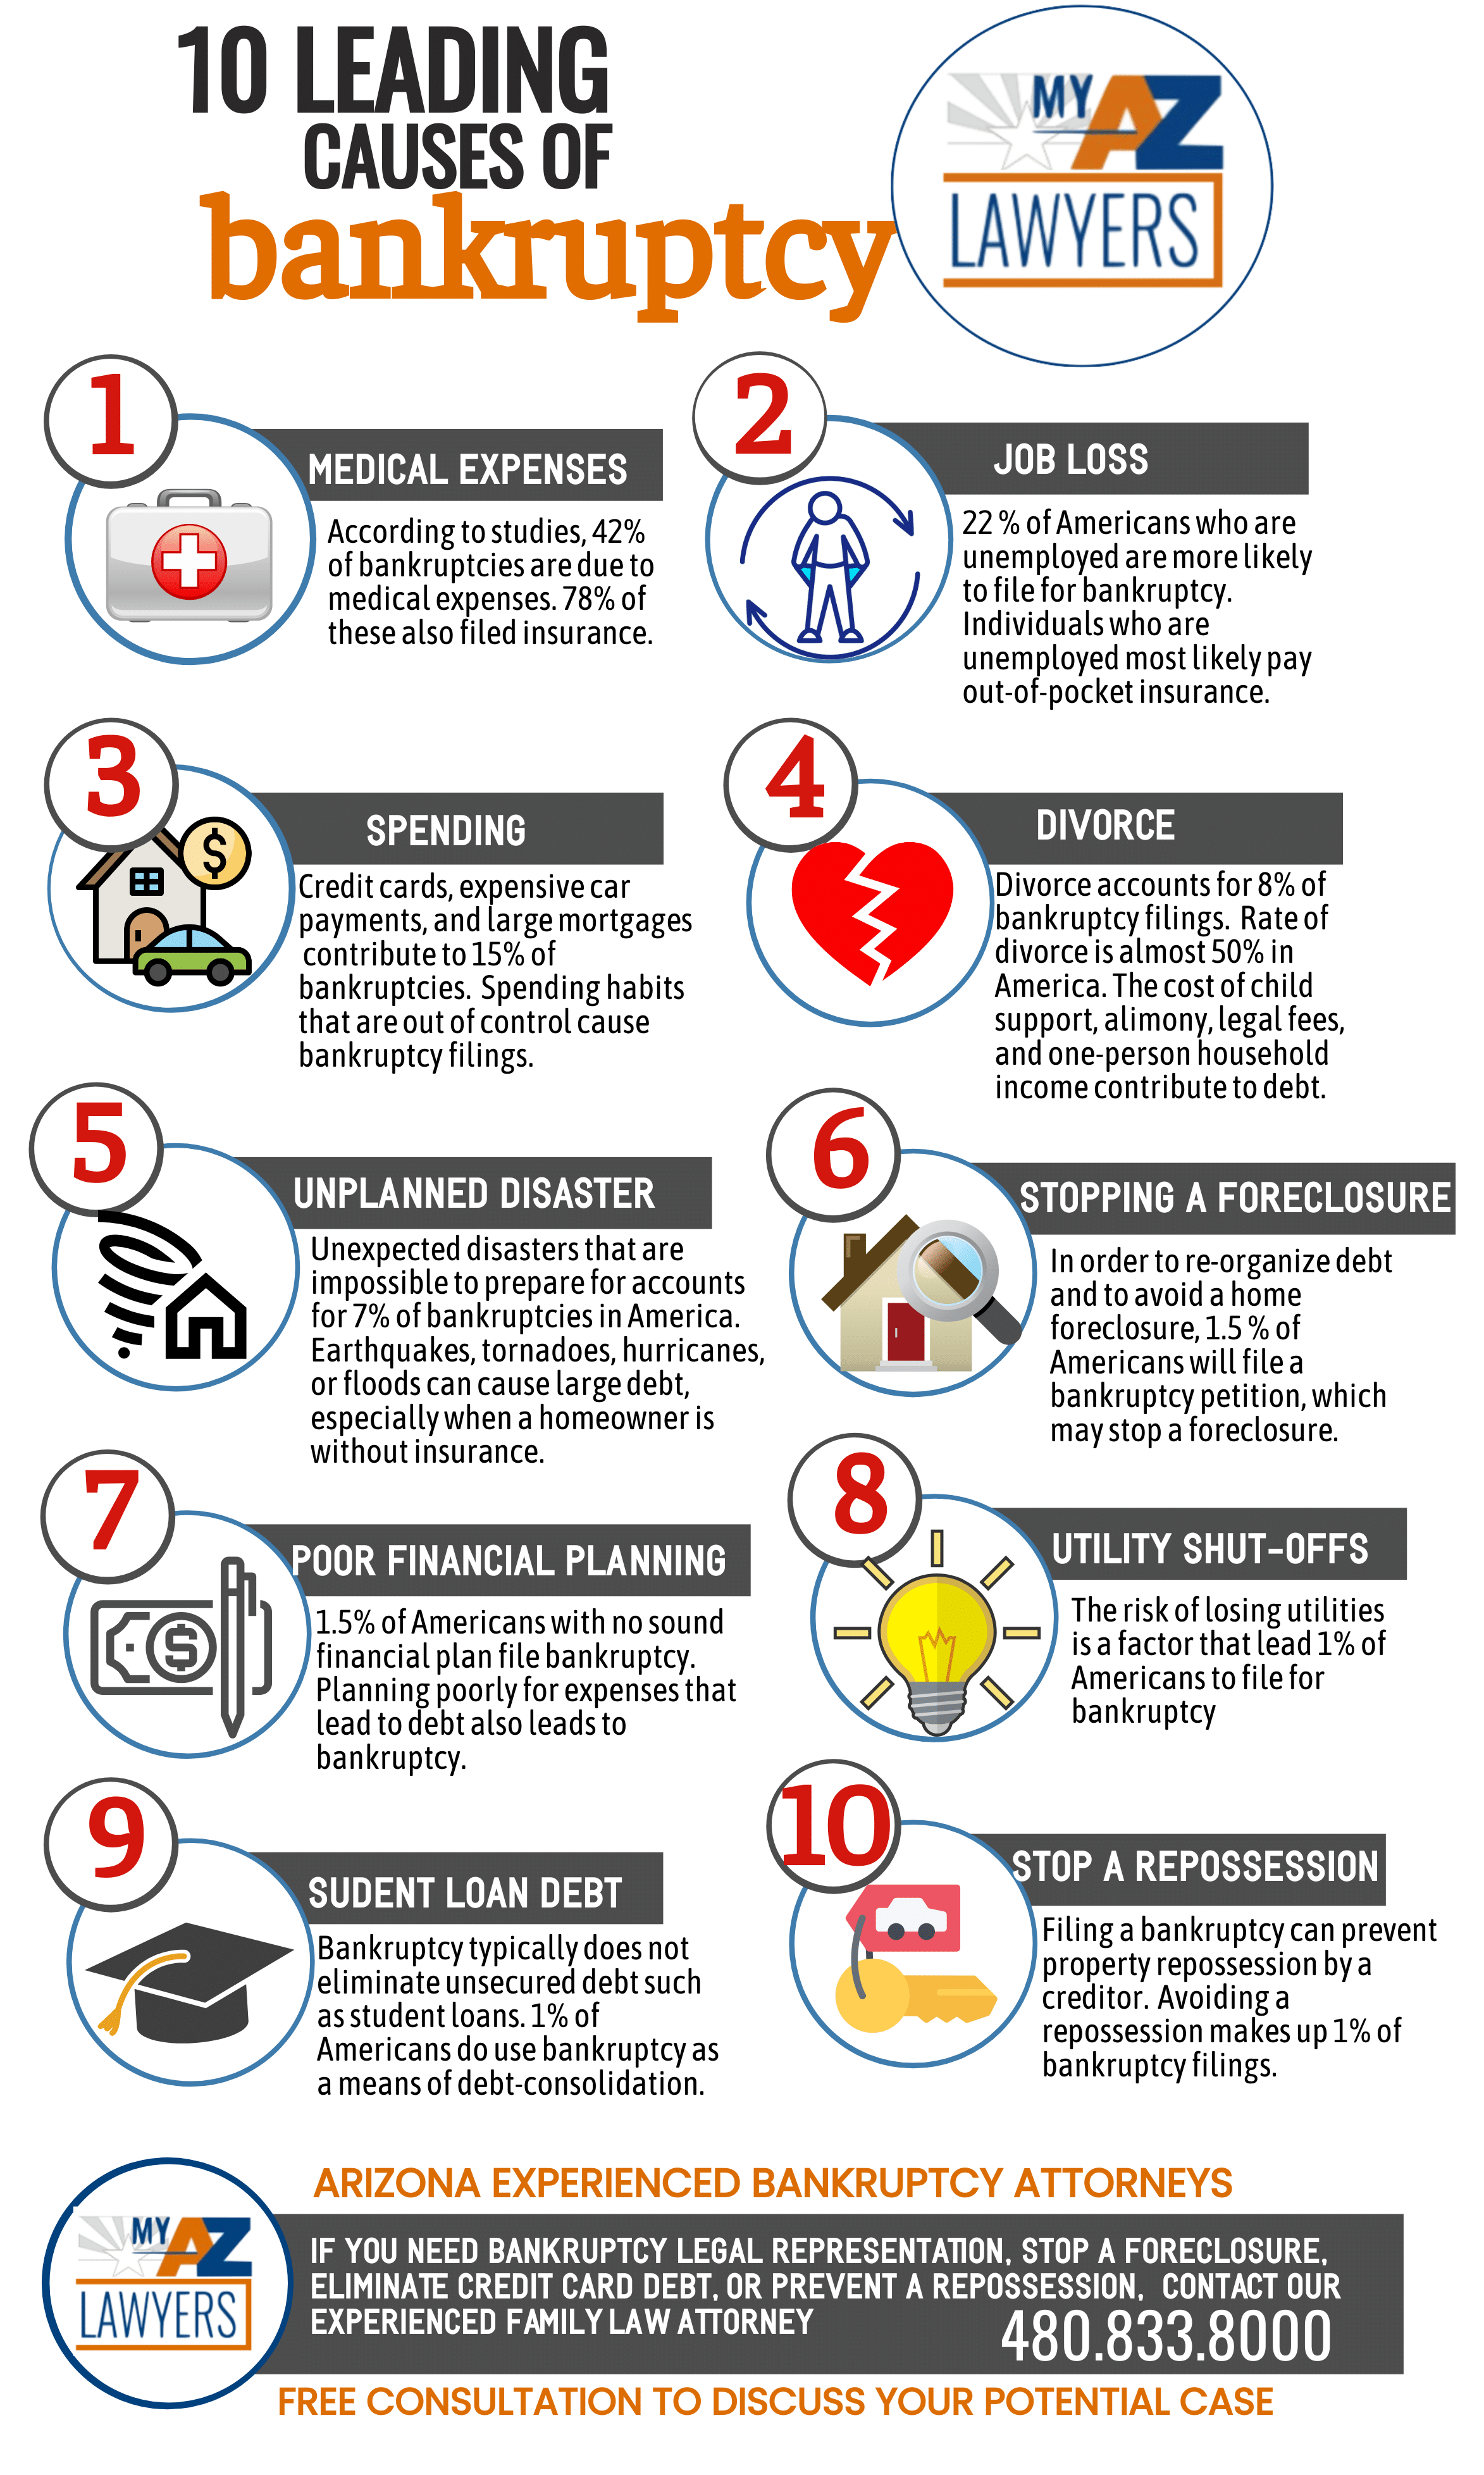 10 leading causes of bankruptcy infographic